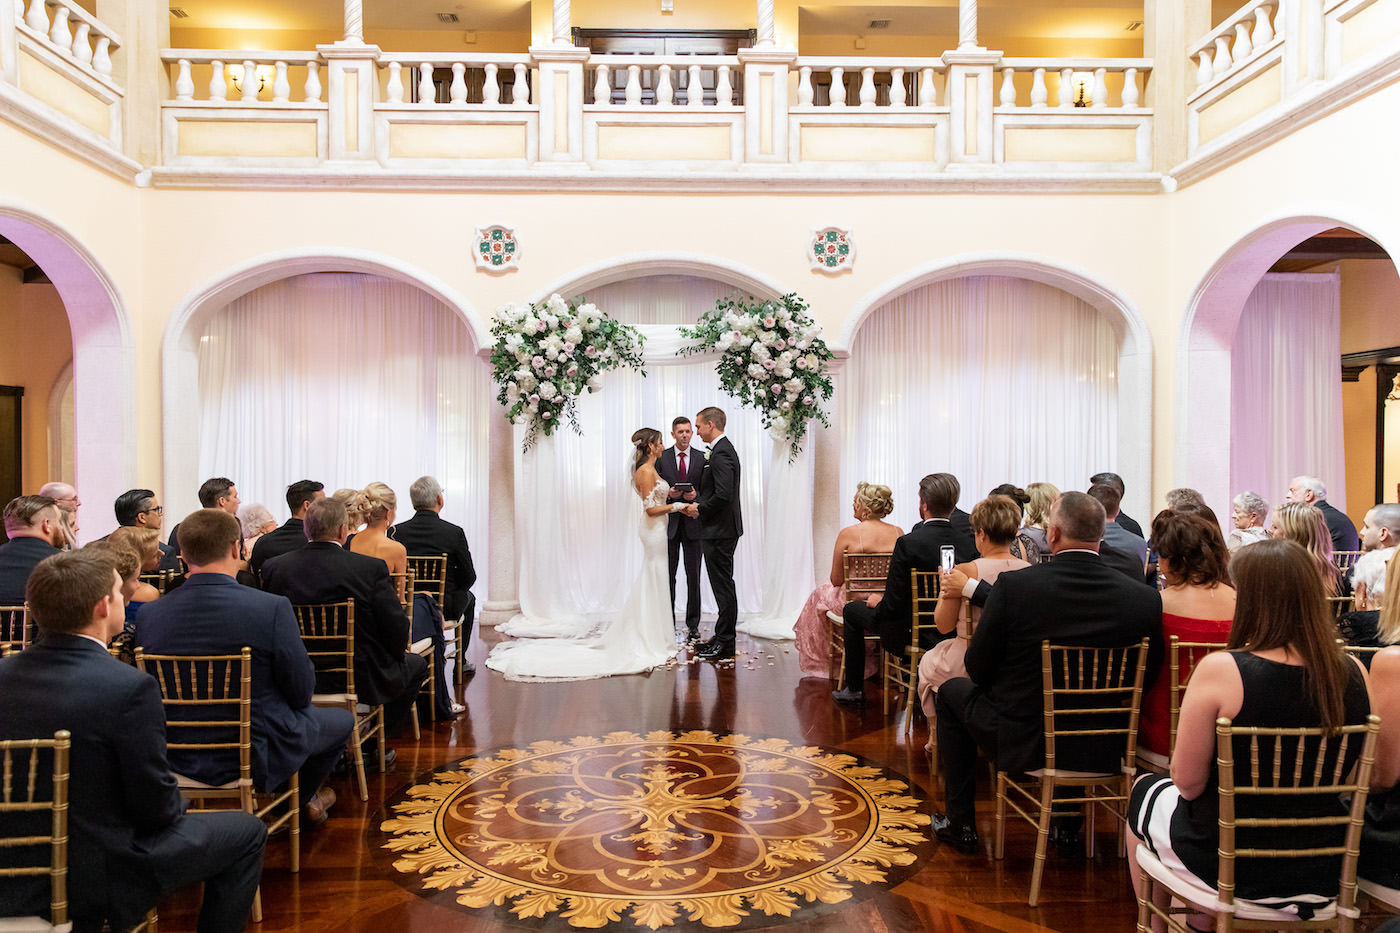 Bride and Groom Exchanging Vows at Tampa Wedding Venue Avila Golf & Country Club Indoor Ceremony with Gold Chiavari Chairs, Pipe and Drape Backdrop with Blush Pink and Ivory Rose Floral Arrangements with Eucalyptus Greenery